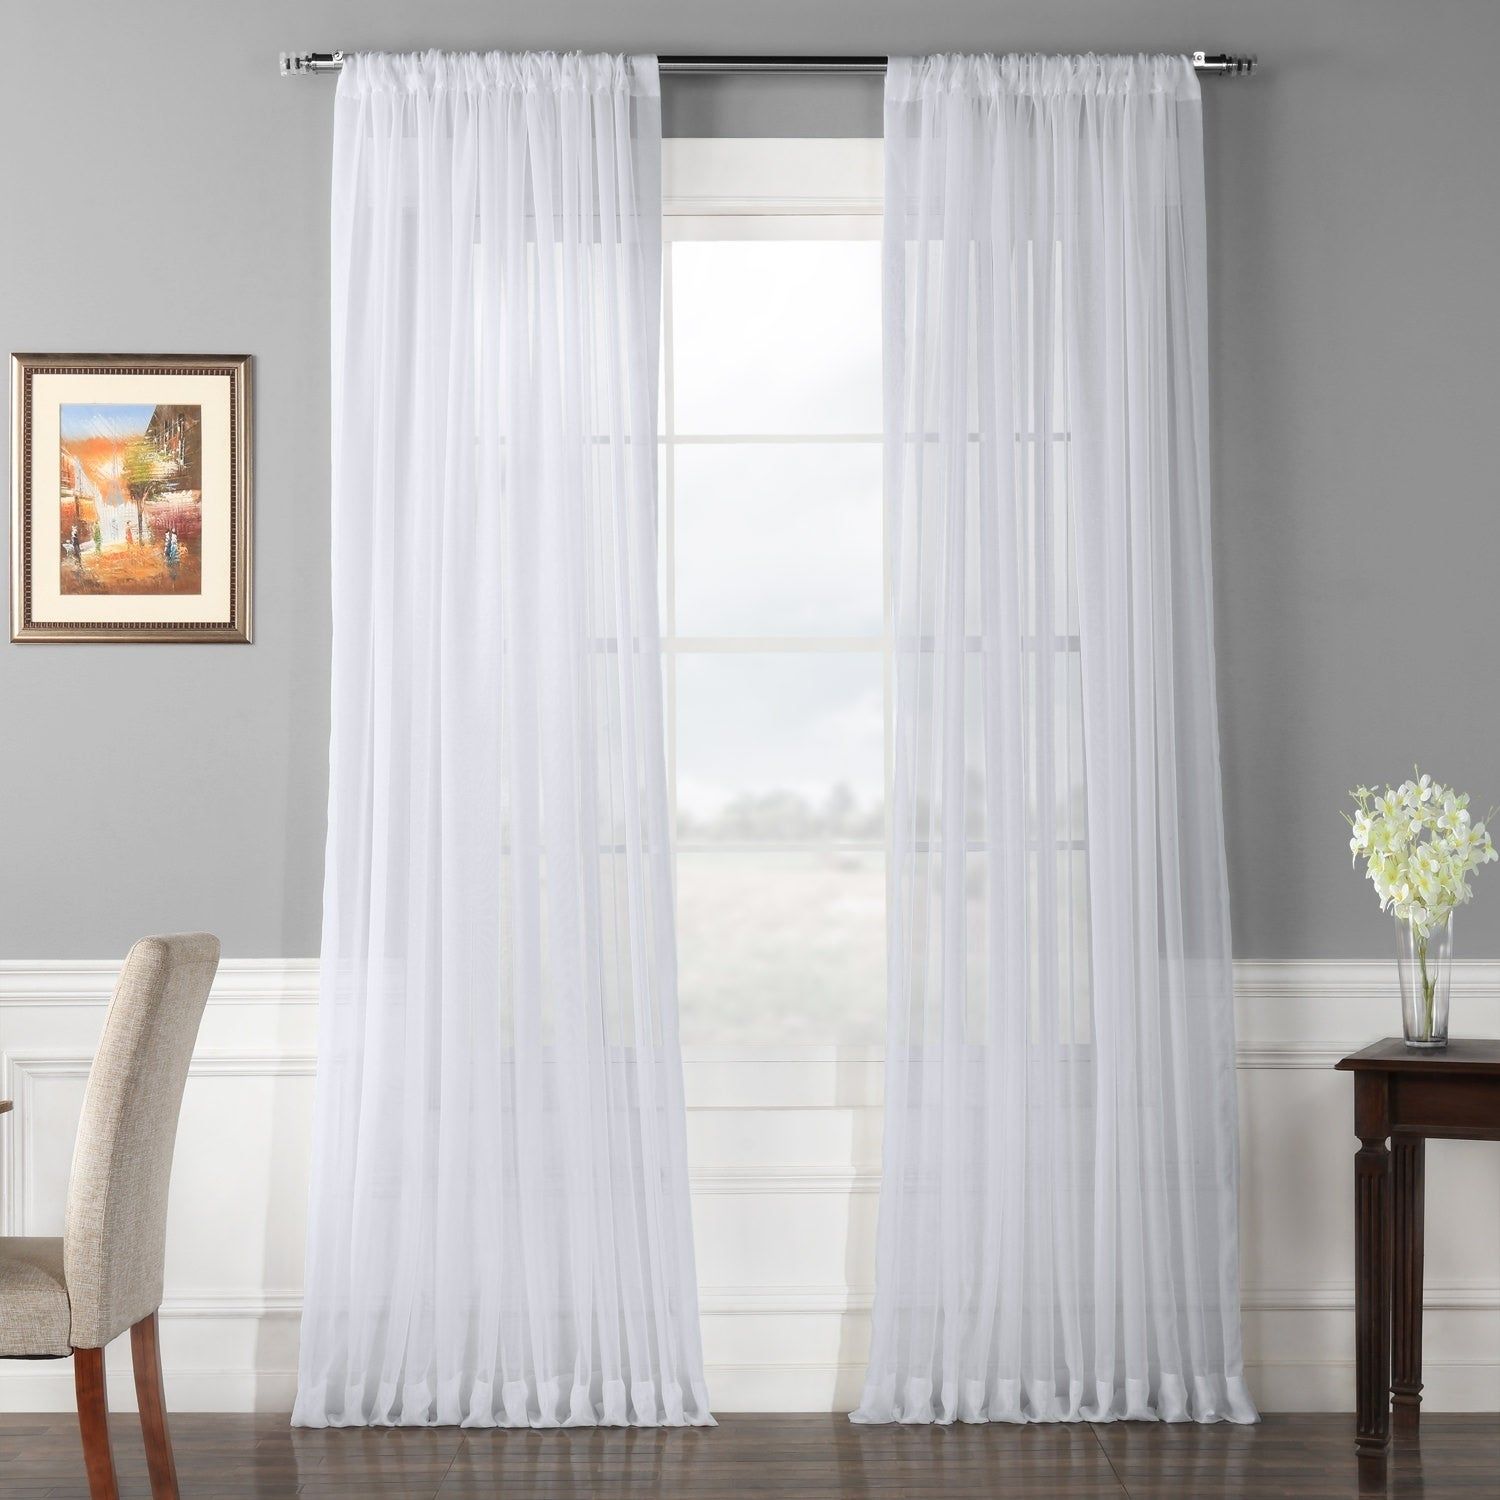 Exclusive Fabrics Extra Wide White Voile Sheer Curtain Panel Within Extra Wide White Voile Sheer Curtain Panels (View 1 of 20)